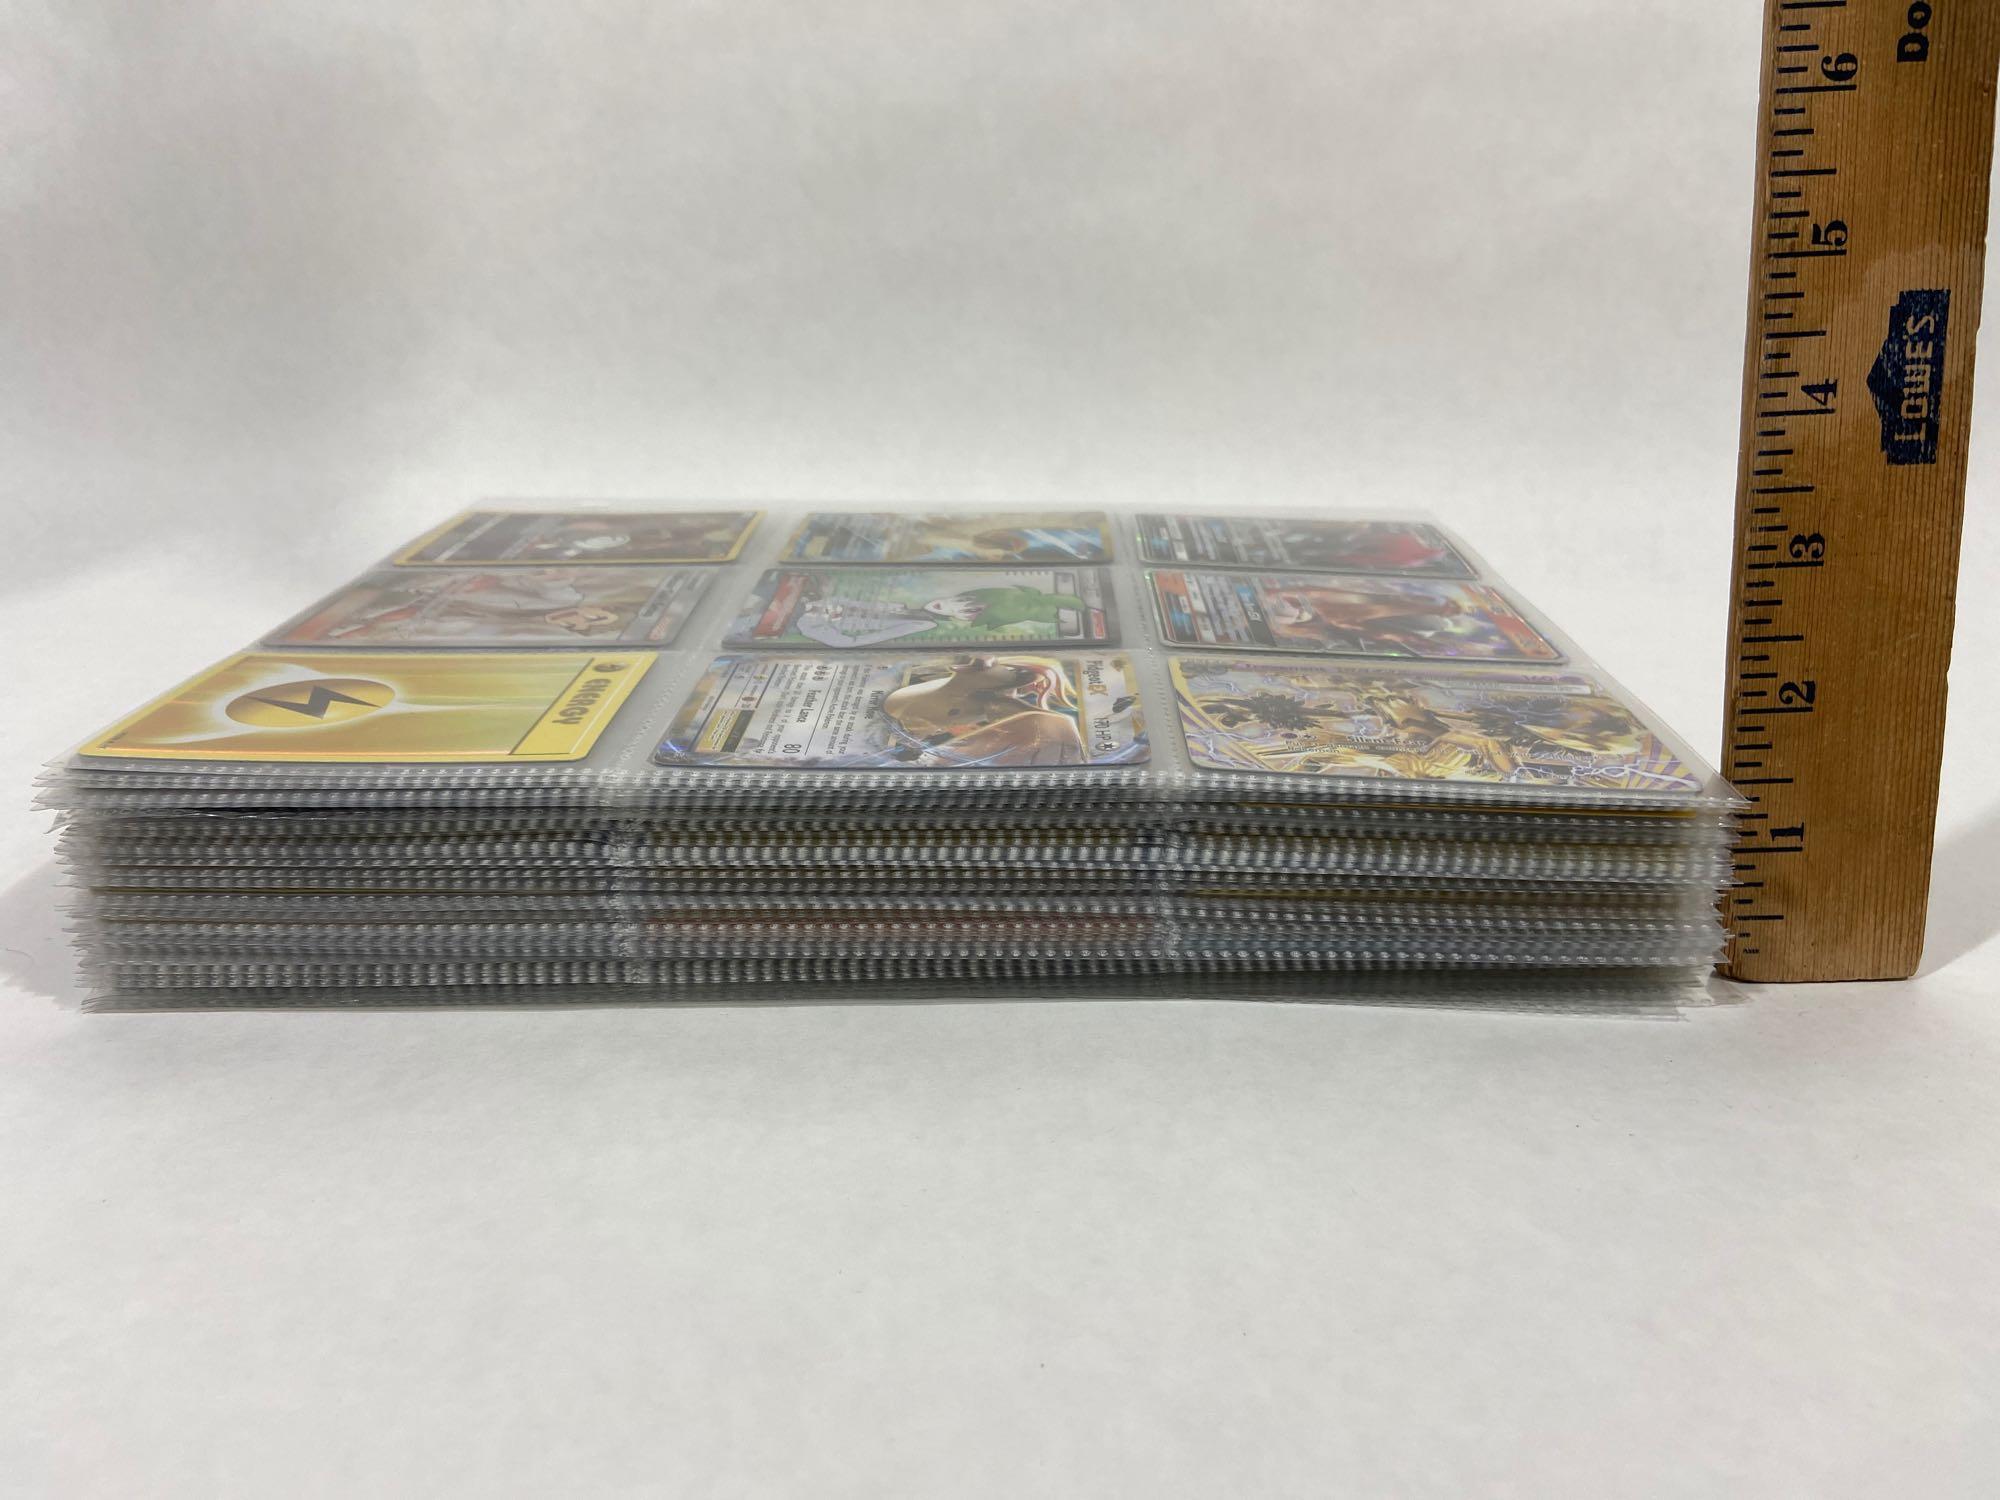 550+ Pokemon Trading Cards, many are Break, EX, GX, Holographic Foil, etc